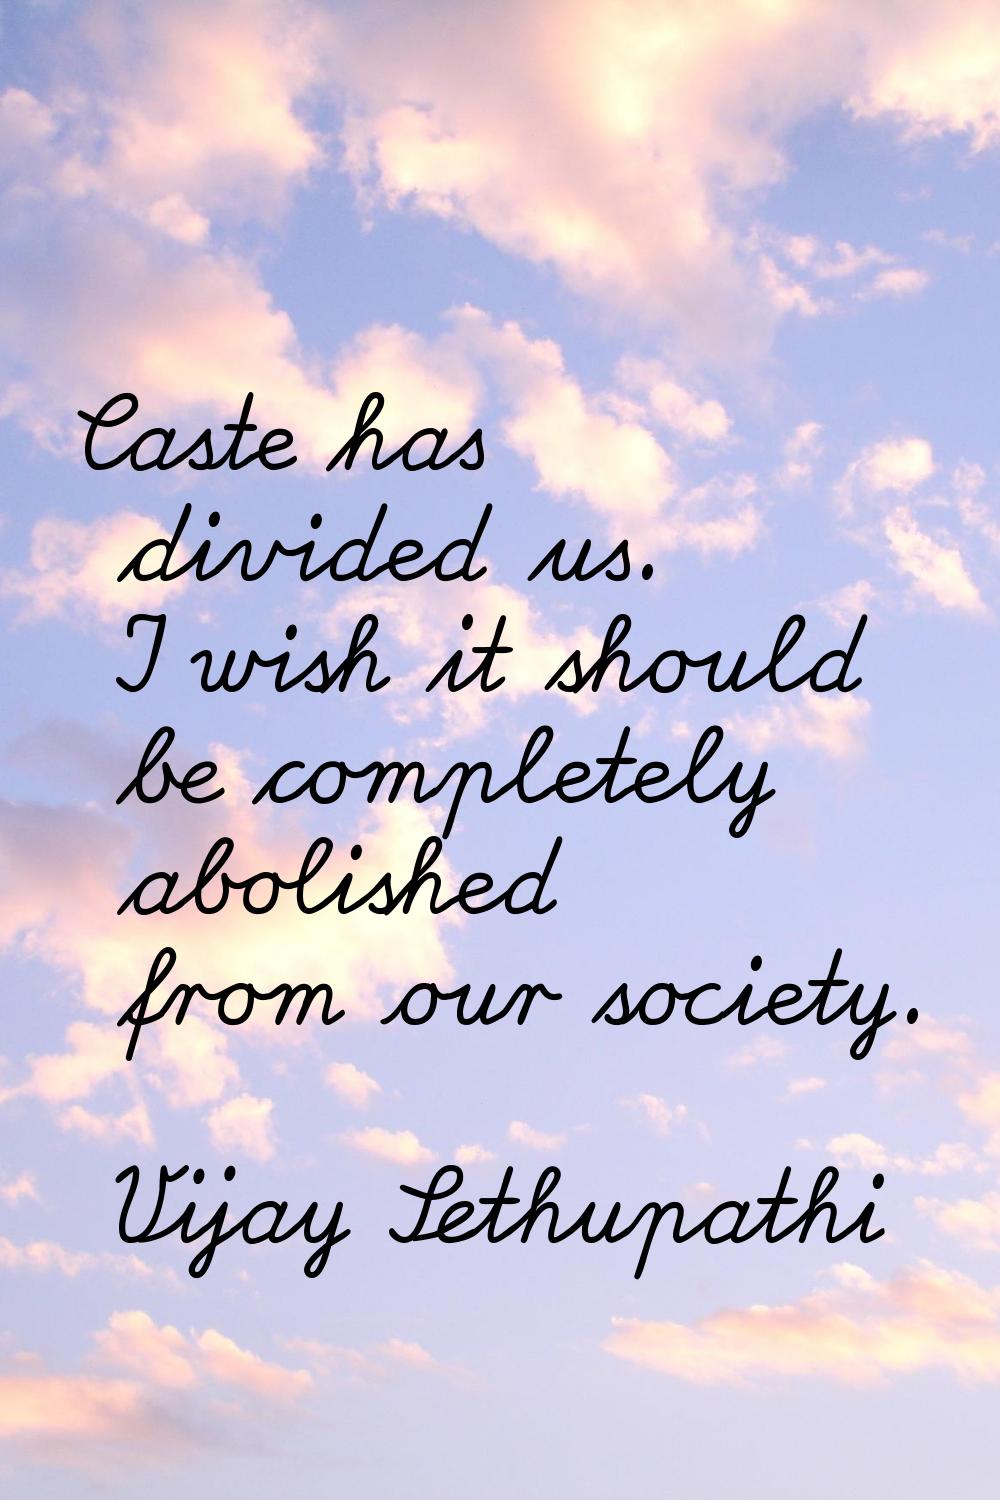 Caste has divided us. I wish it should be completely abolished from our society.